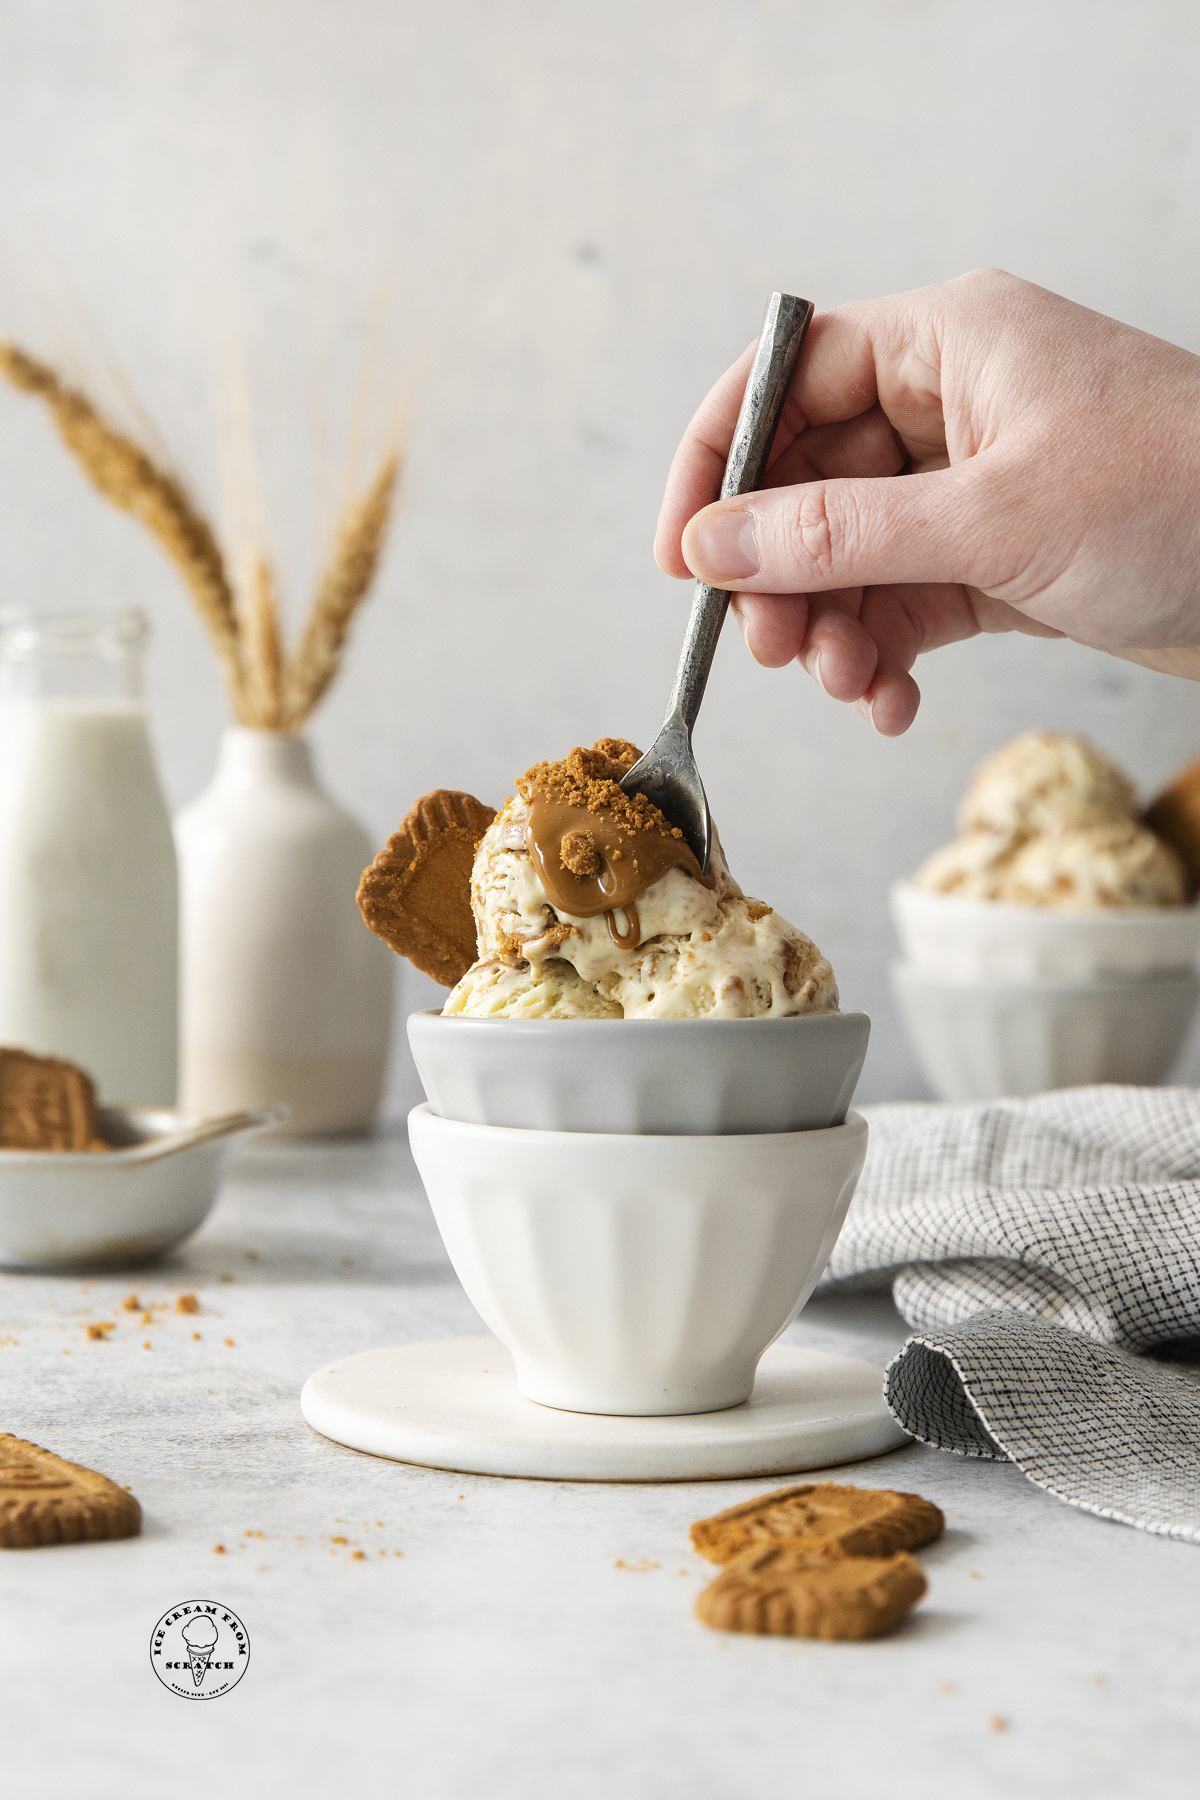 a hand holding a spoon that is digging into a bowl of homemade biscoff ice cream